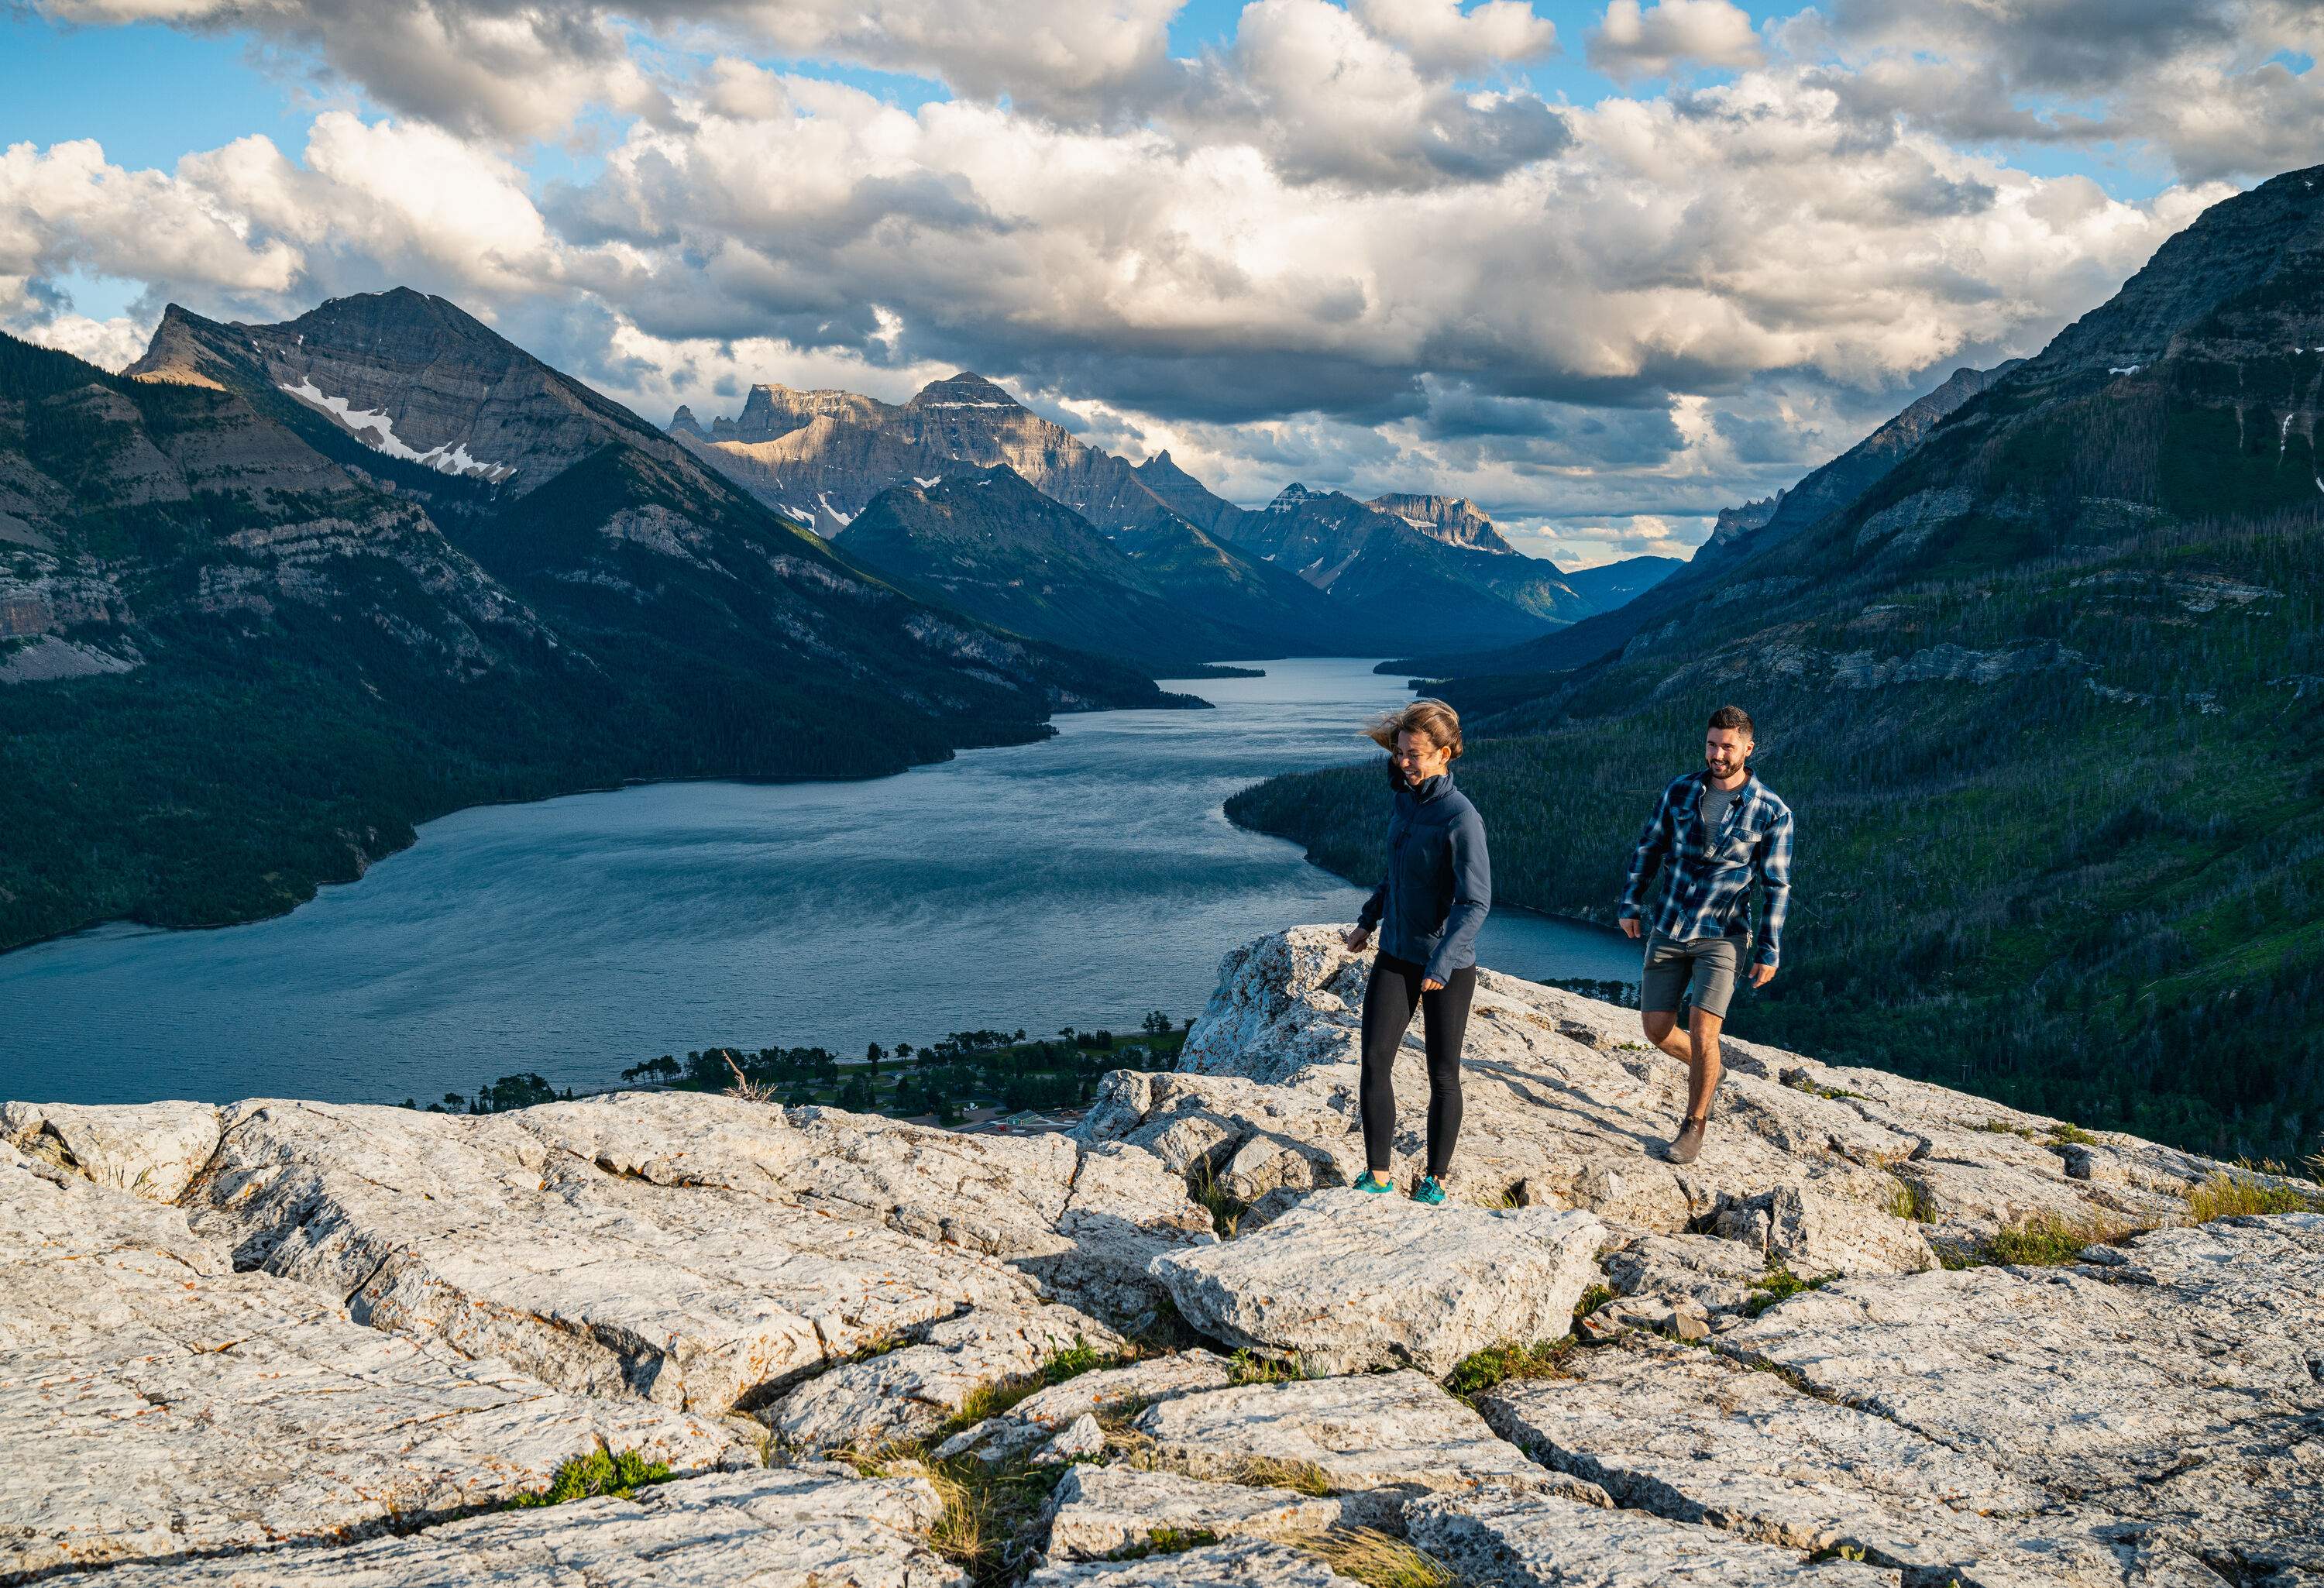 A couple hiking on a rocky summit with overlooking views of a lake between the valleys.